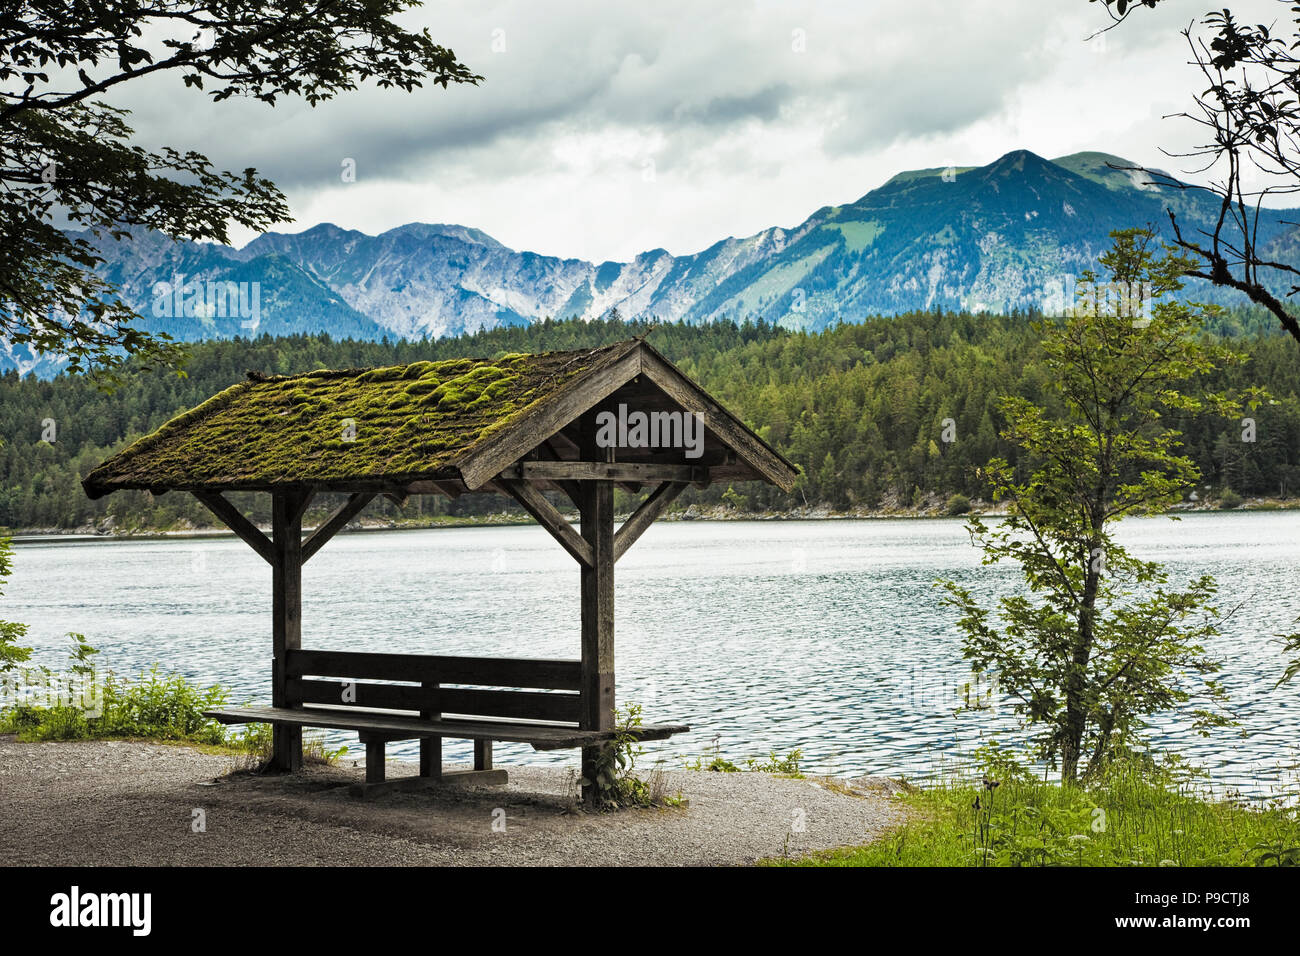 Lake Eibsee in the Bavarian Alps, Bavaria, Germany with small covered bench at the shore Stock Photo